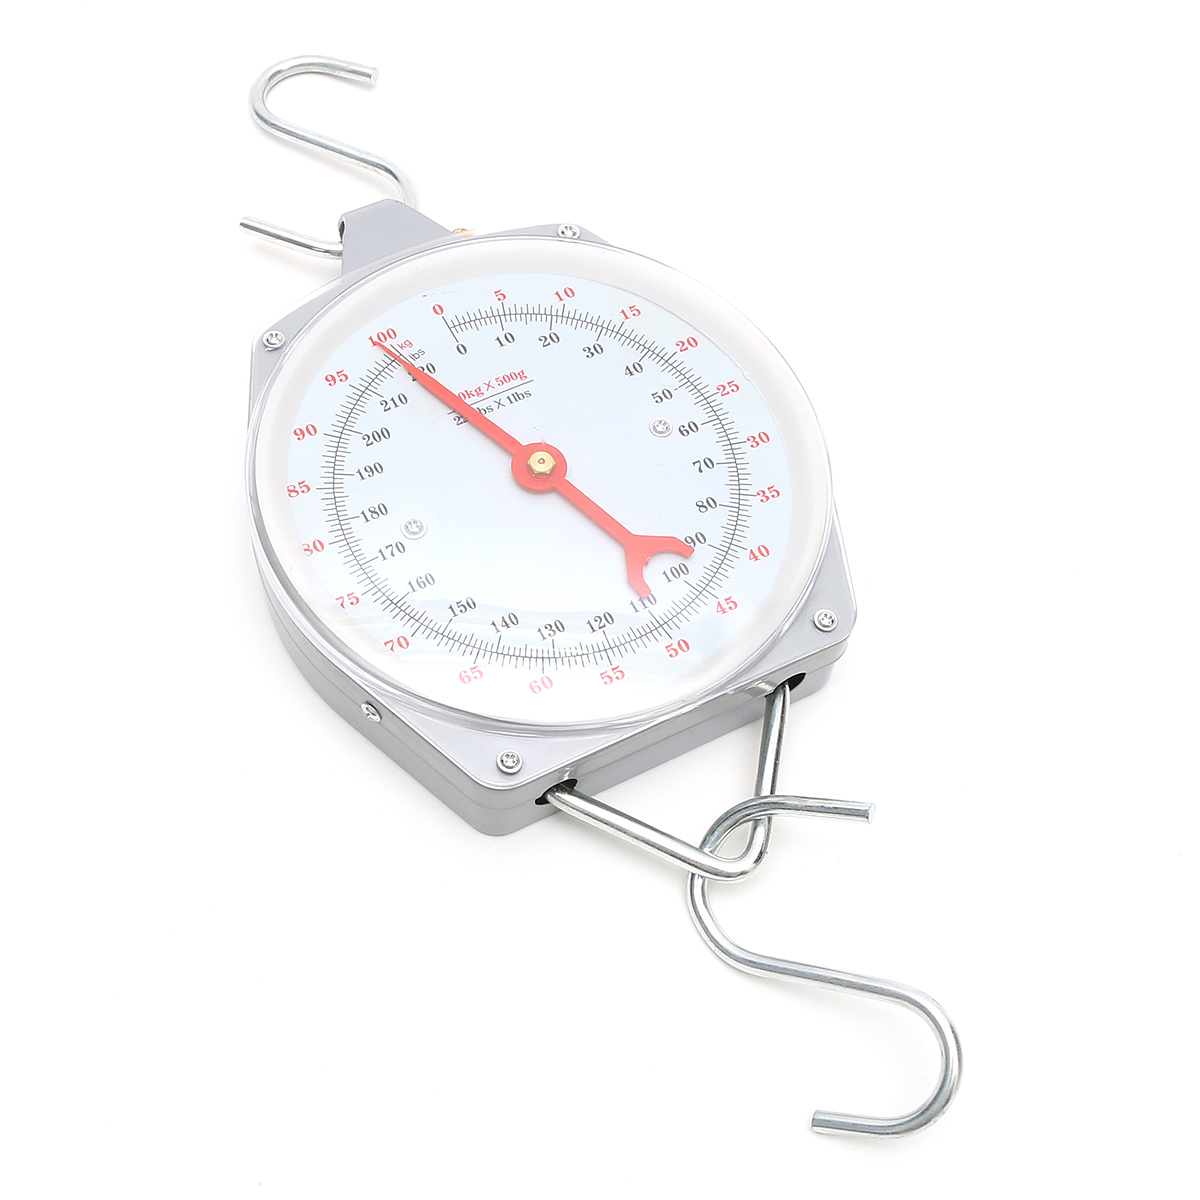 100kg220lbs-Clockface-Hanging-Scale-Weighing-Butchering-with-Hook-1156011-3